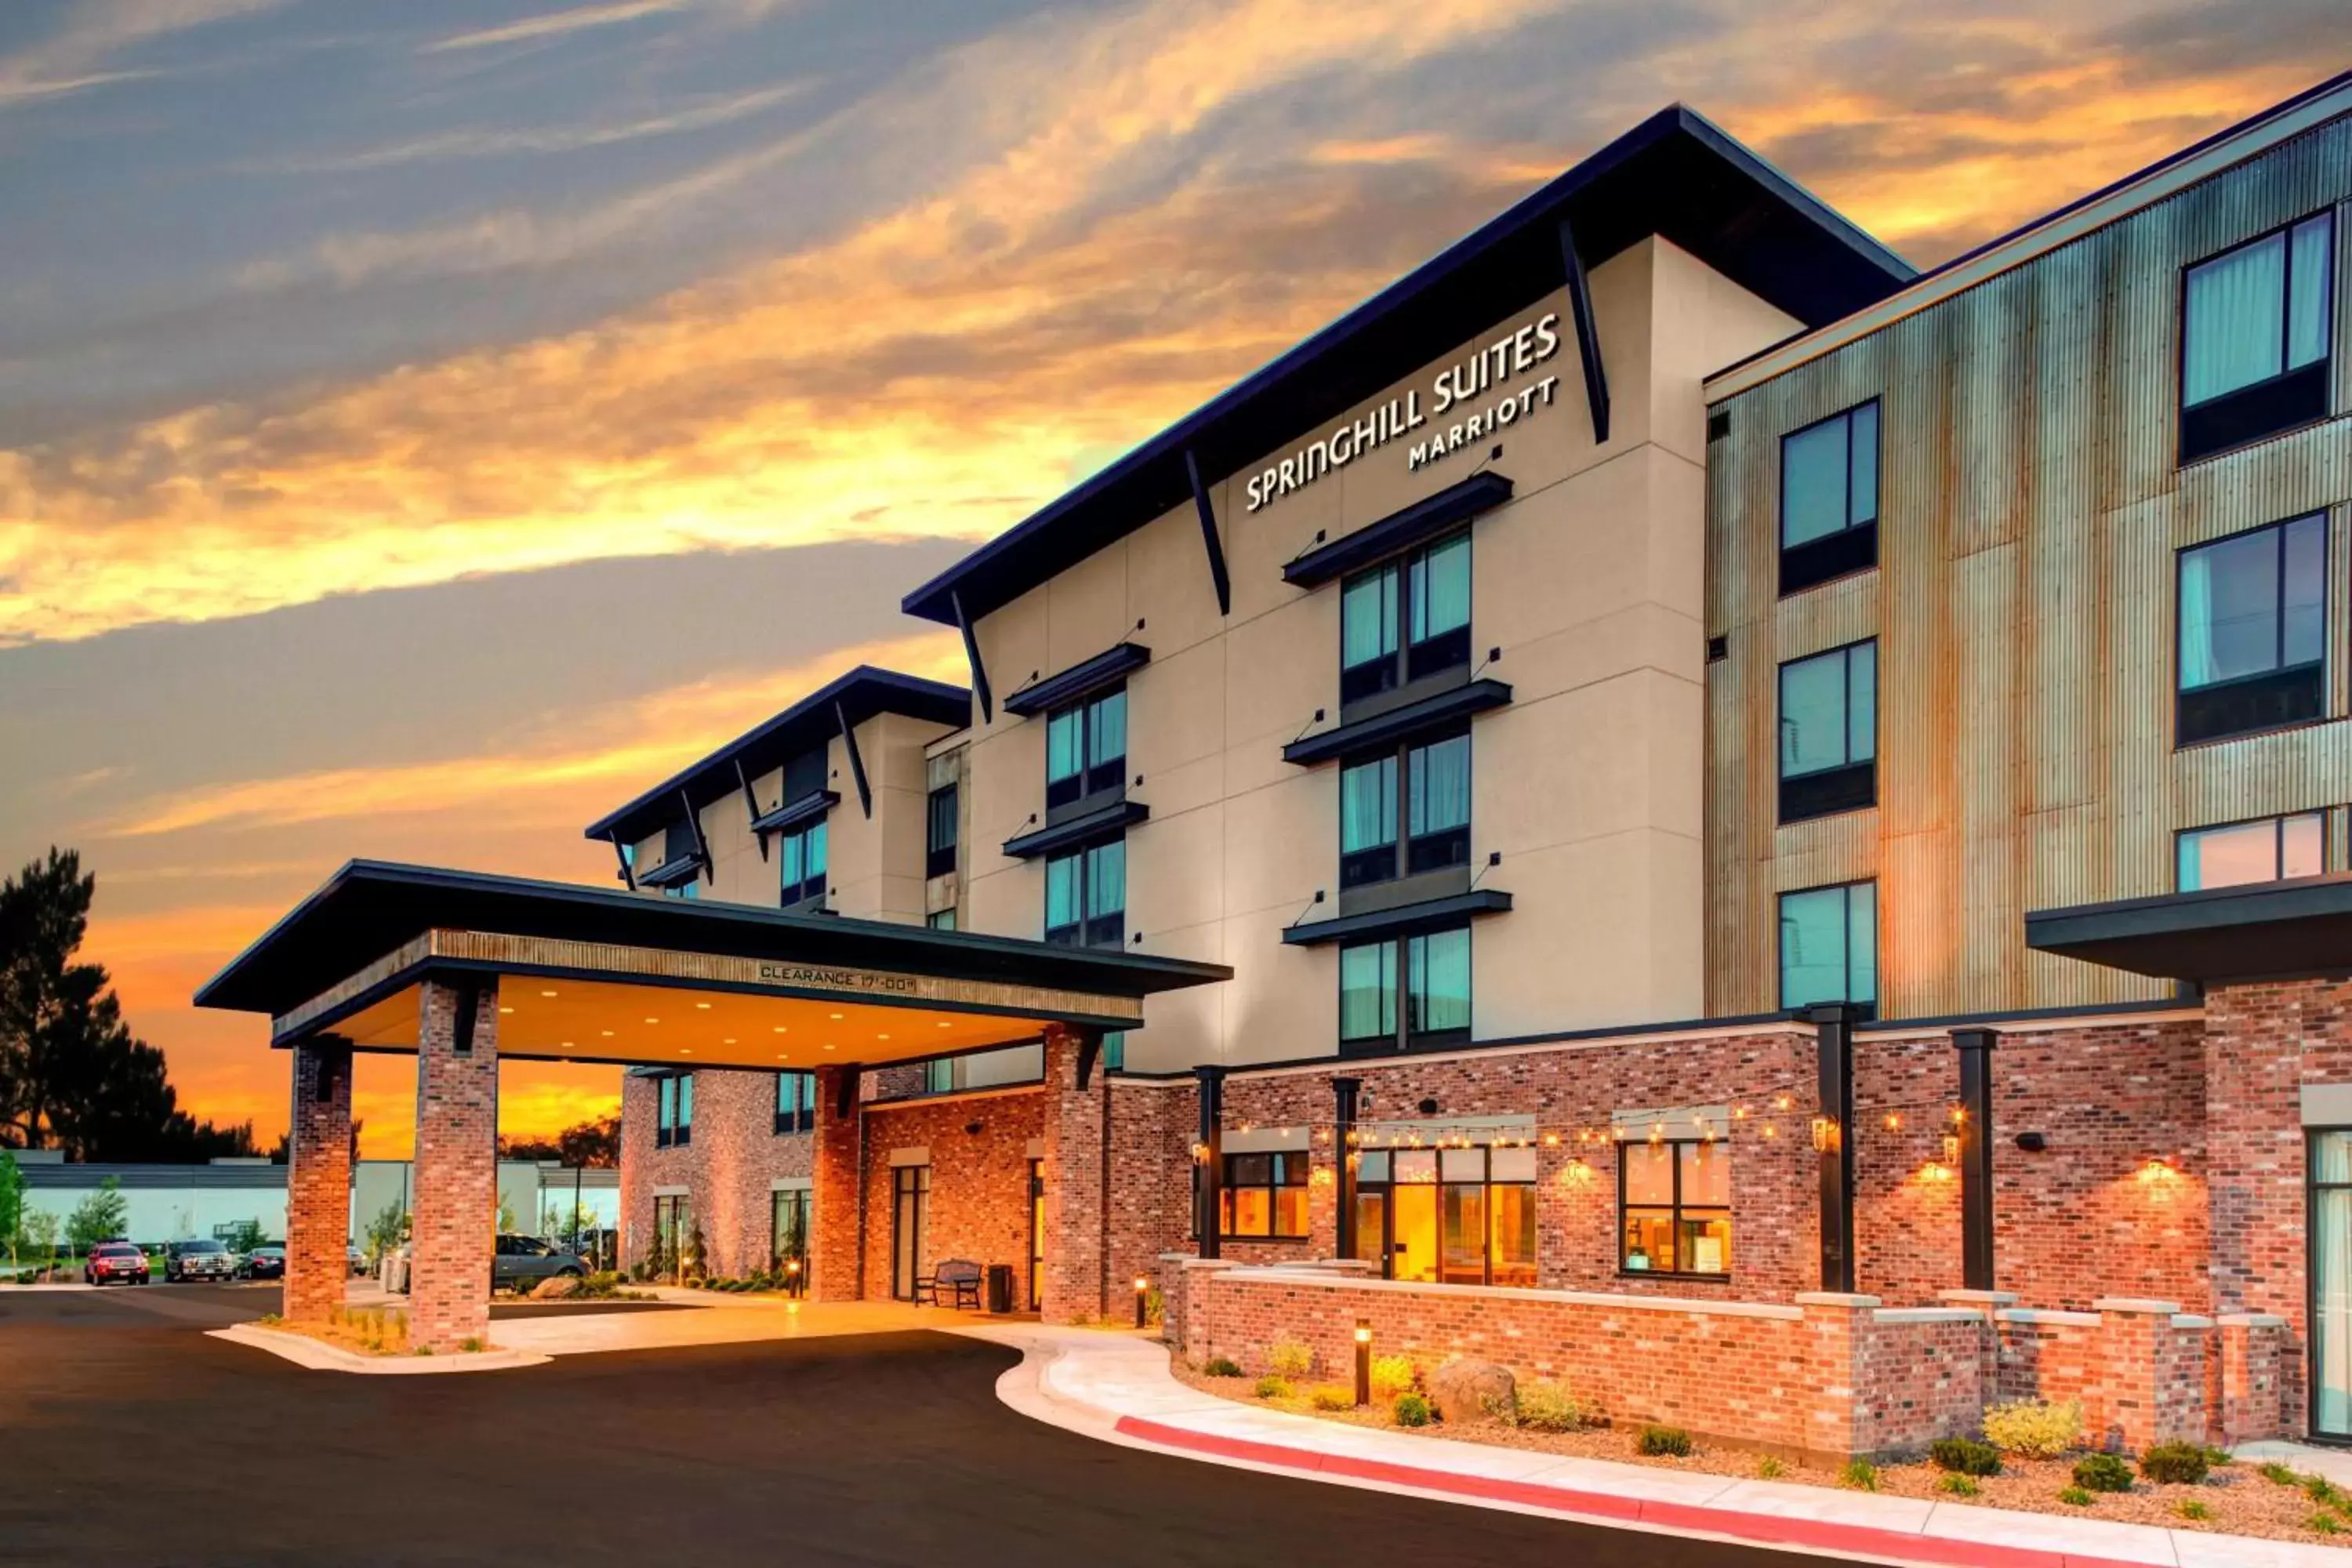 Property Building in SpringHill Suites by Marriott Bozeman